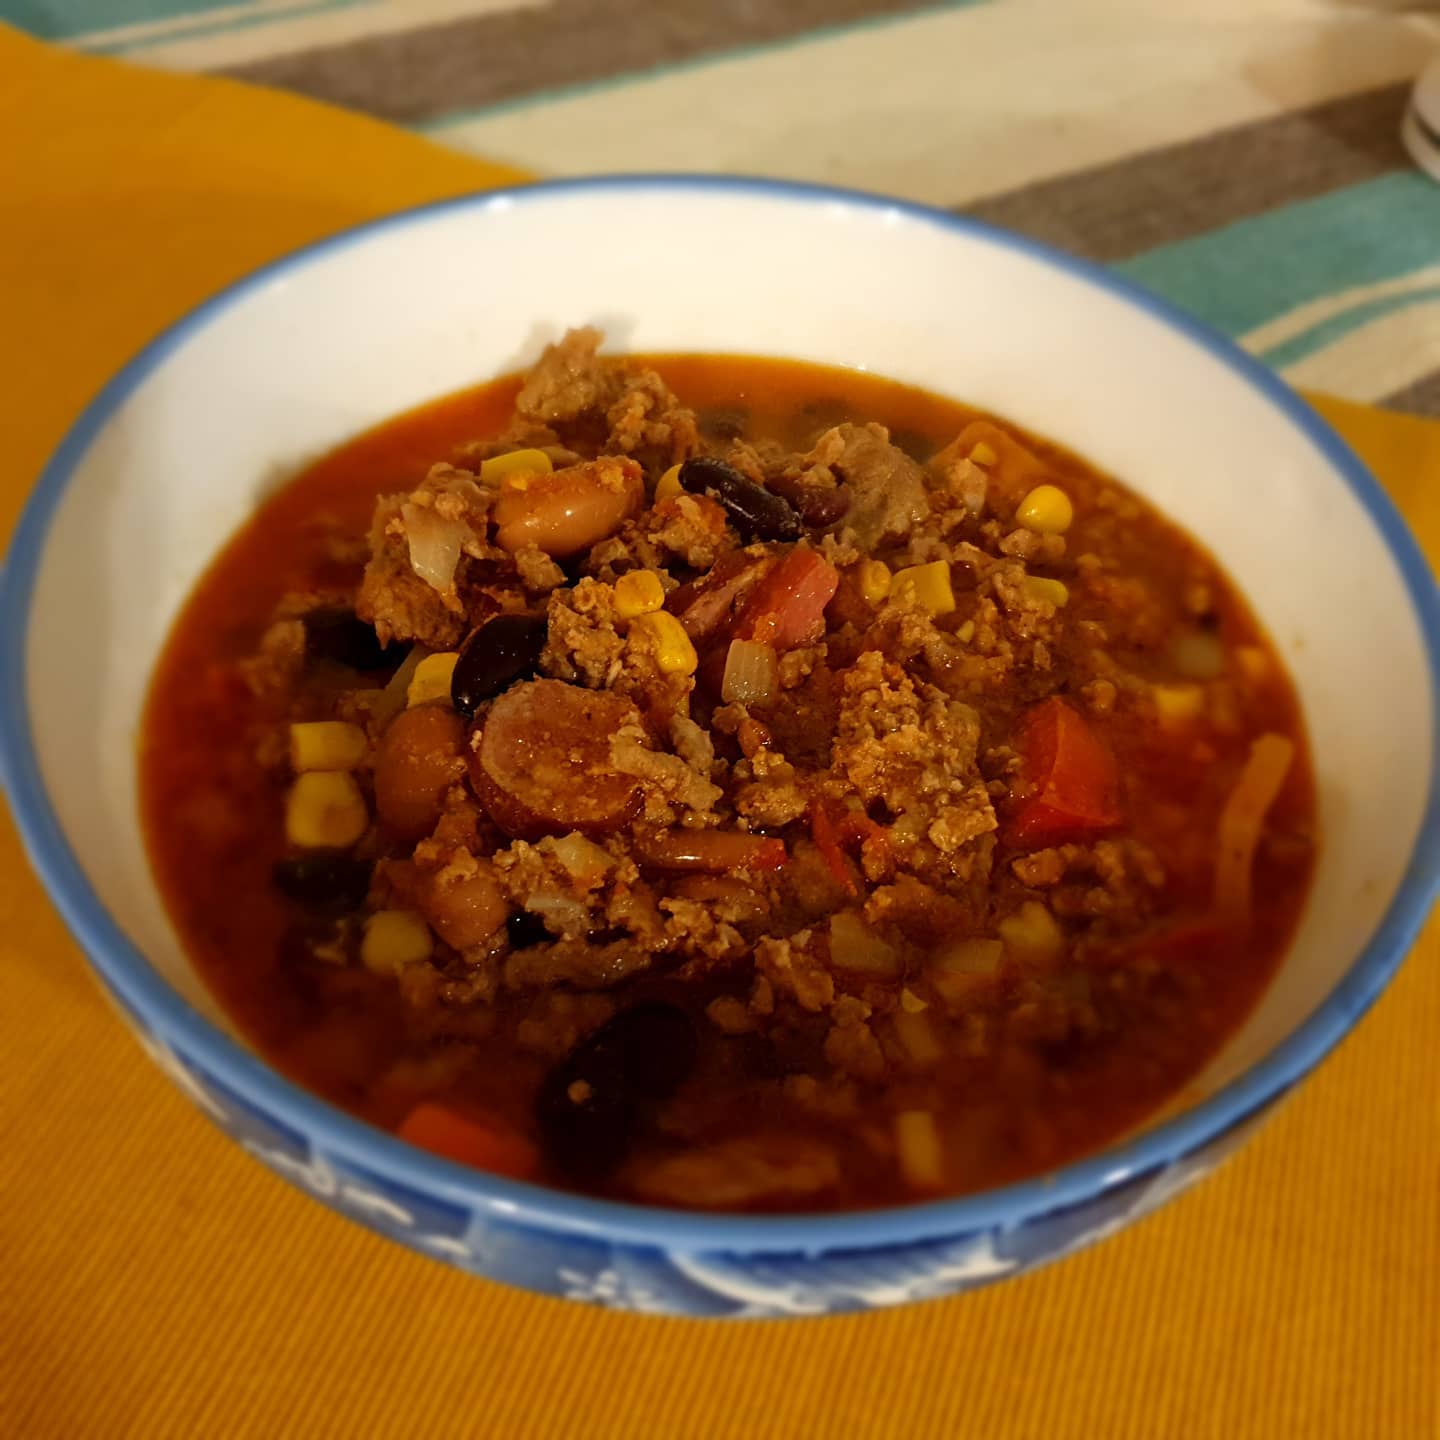 Some sort of chilly con carne with onion, carrot, bell